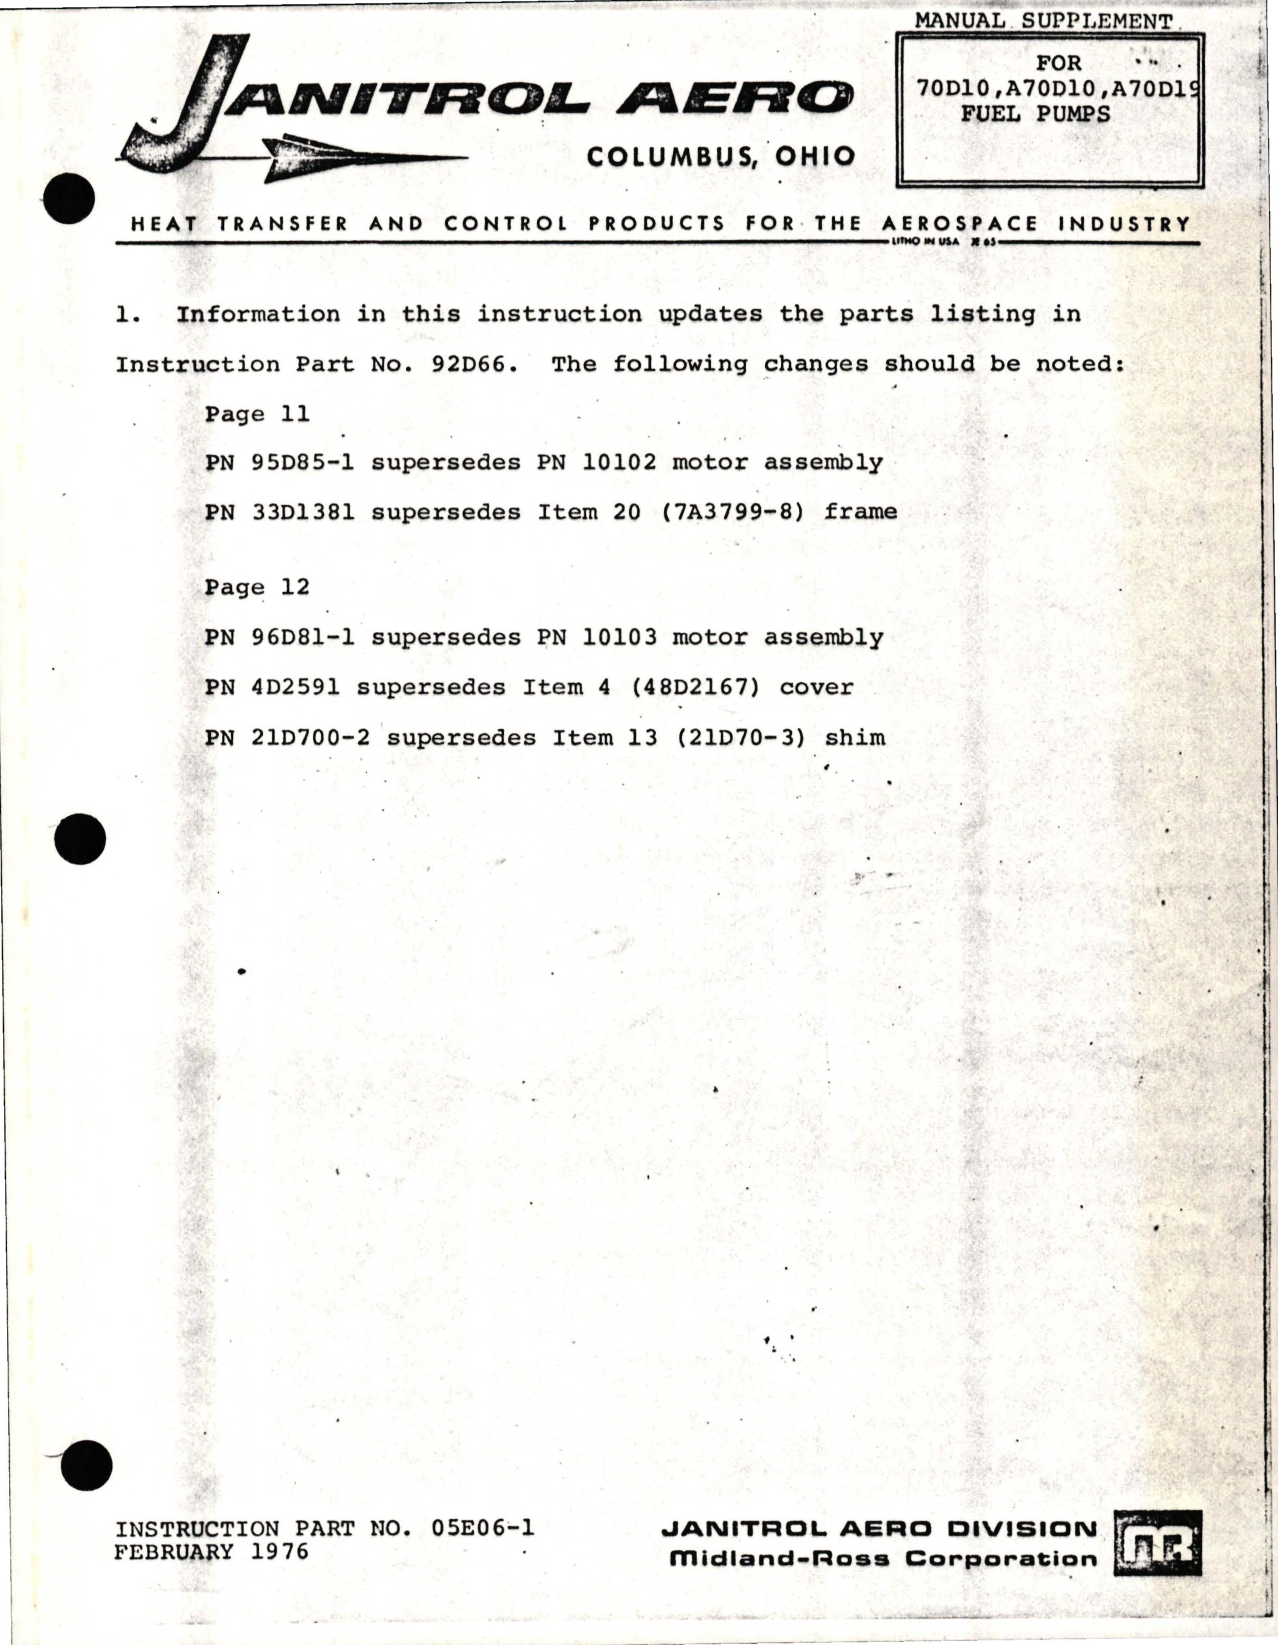 Sample page 1 from AirCorps Library document: Supplement to Maintenance Instructions for Fuel Pumps - Parts 70D10, A70D10, A70D19